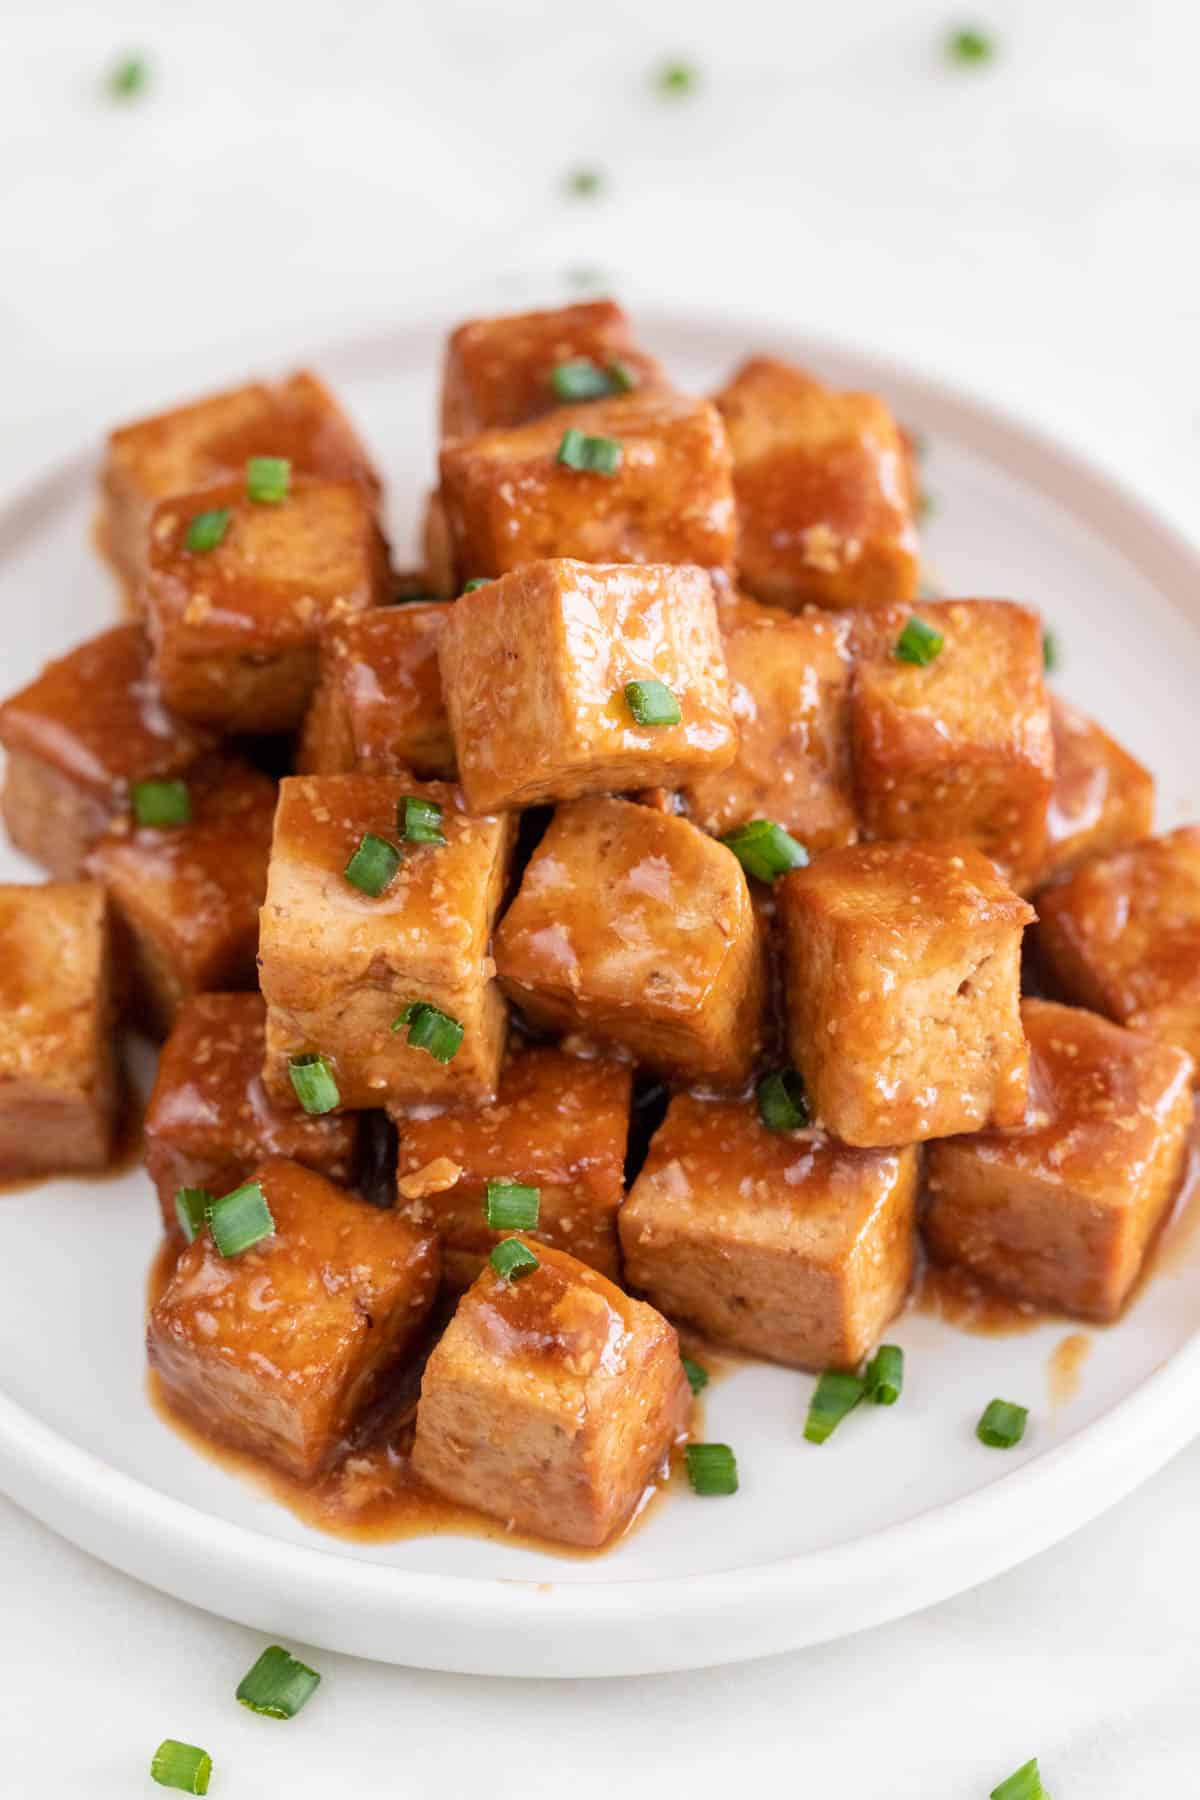 Marinated tofu cubes in a dish with some chopped chives on top.